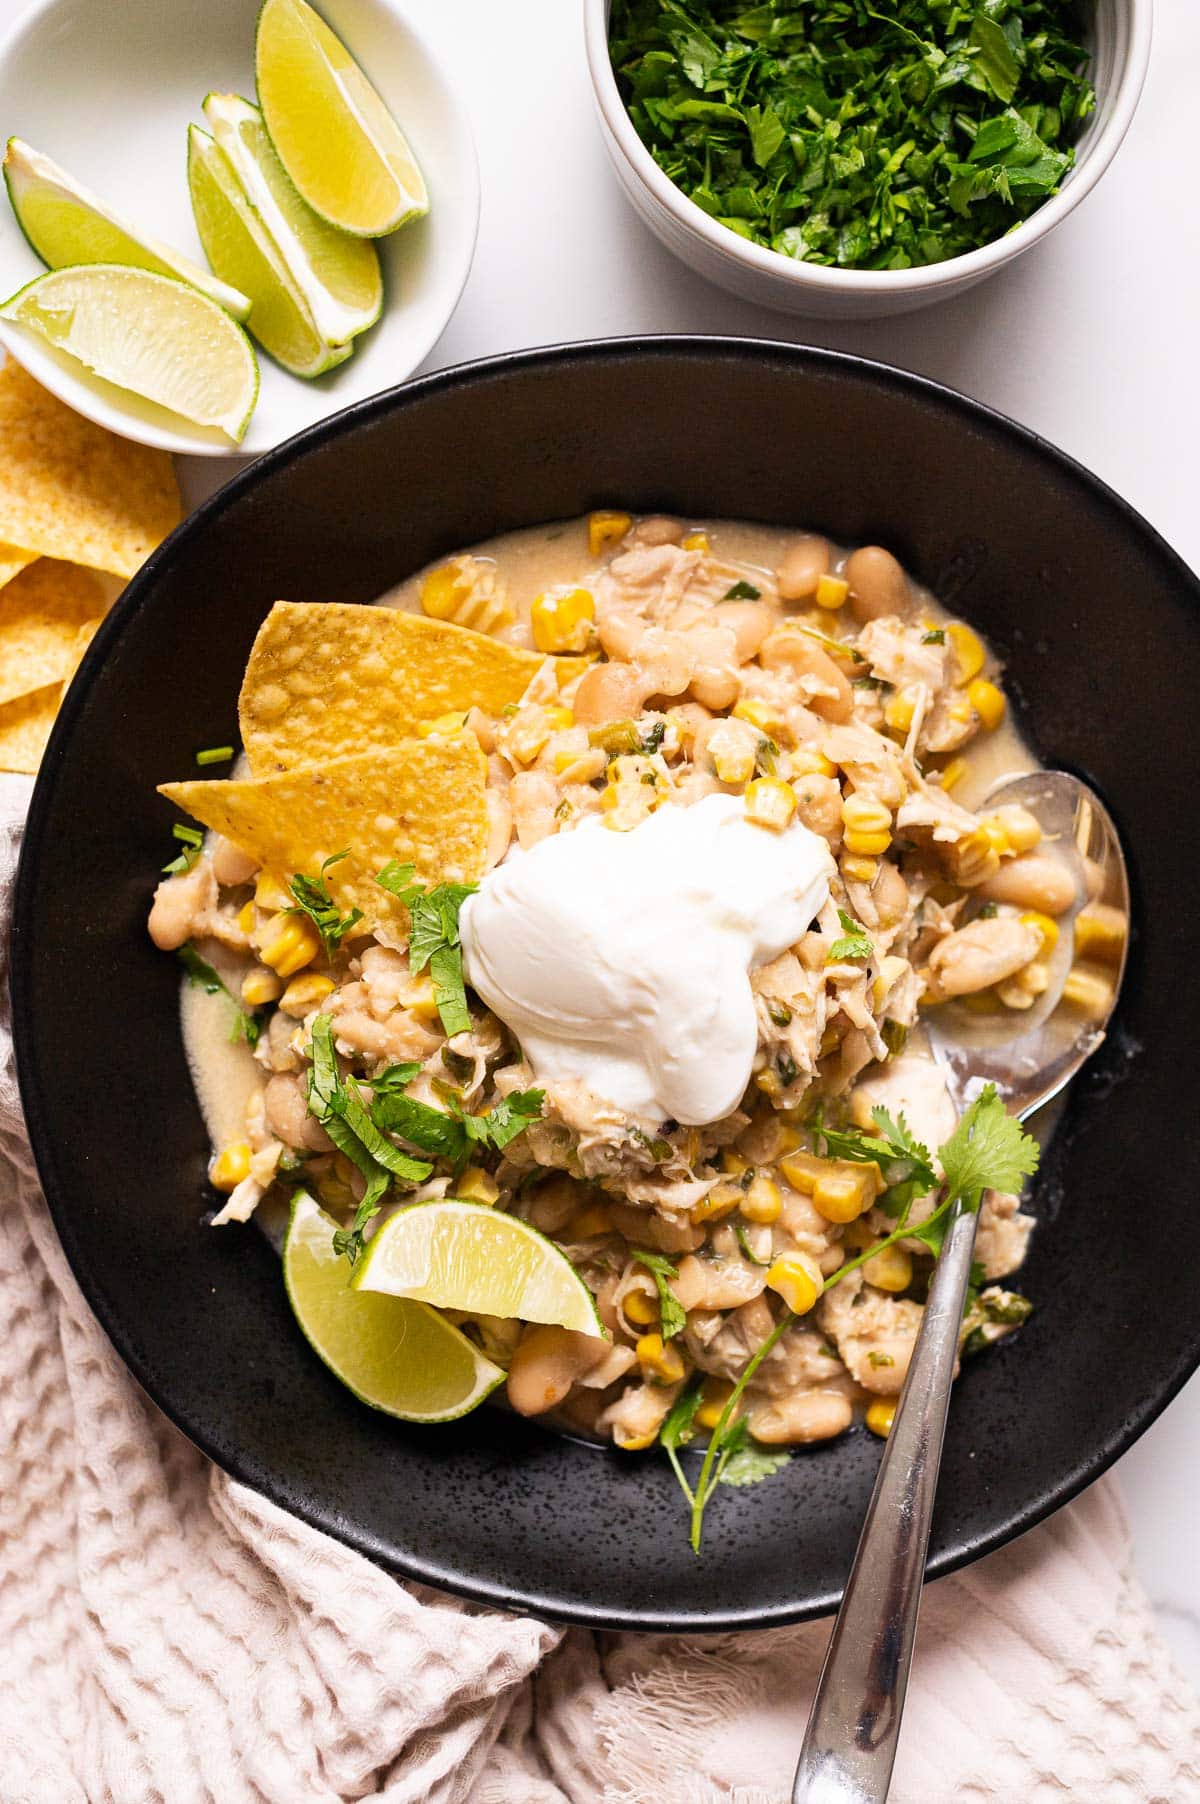 Crockpot white chicken chili served with tortilla chips, sour cream, lime and cilantro in a bowl with a spoon.